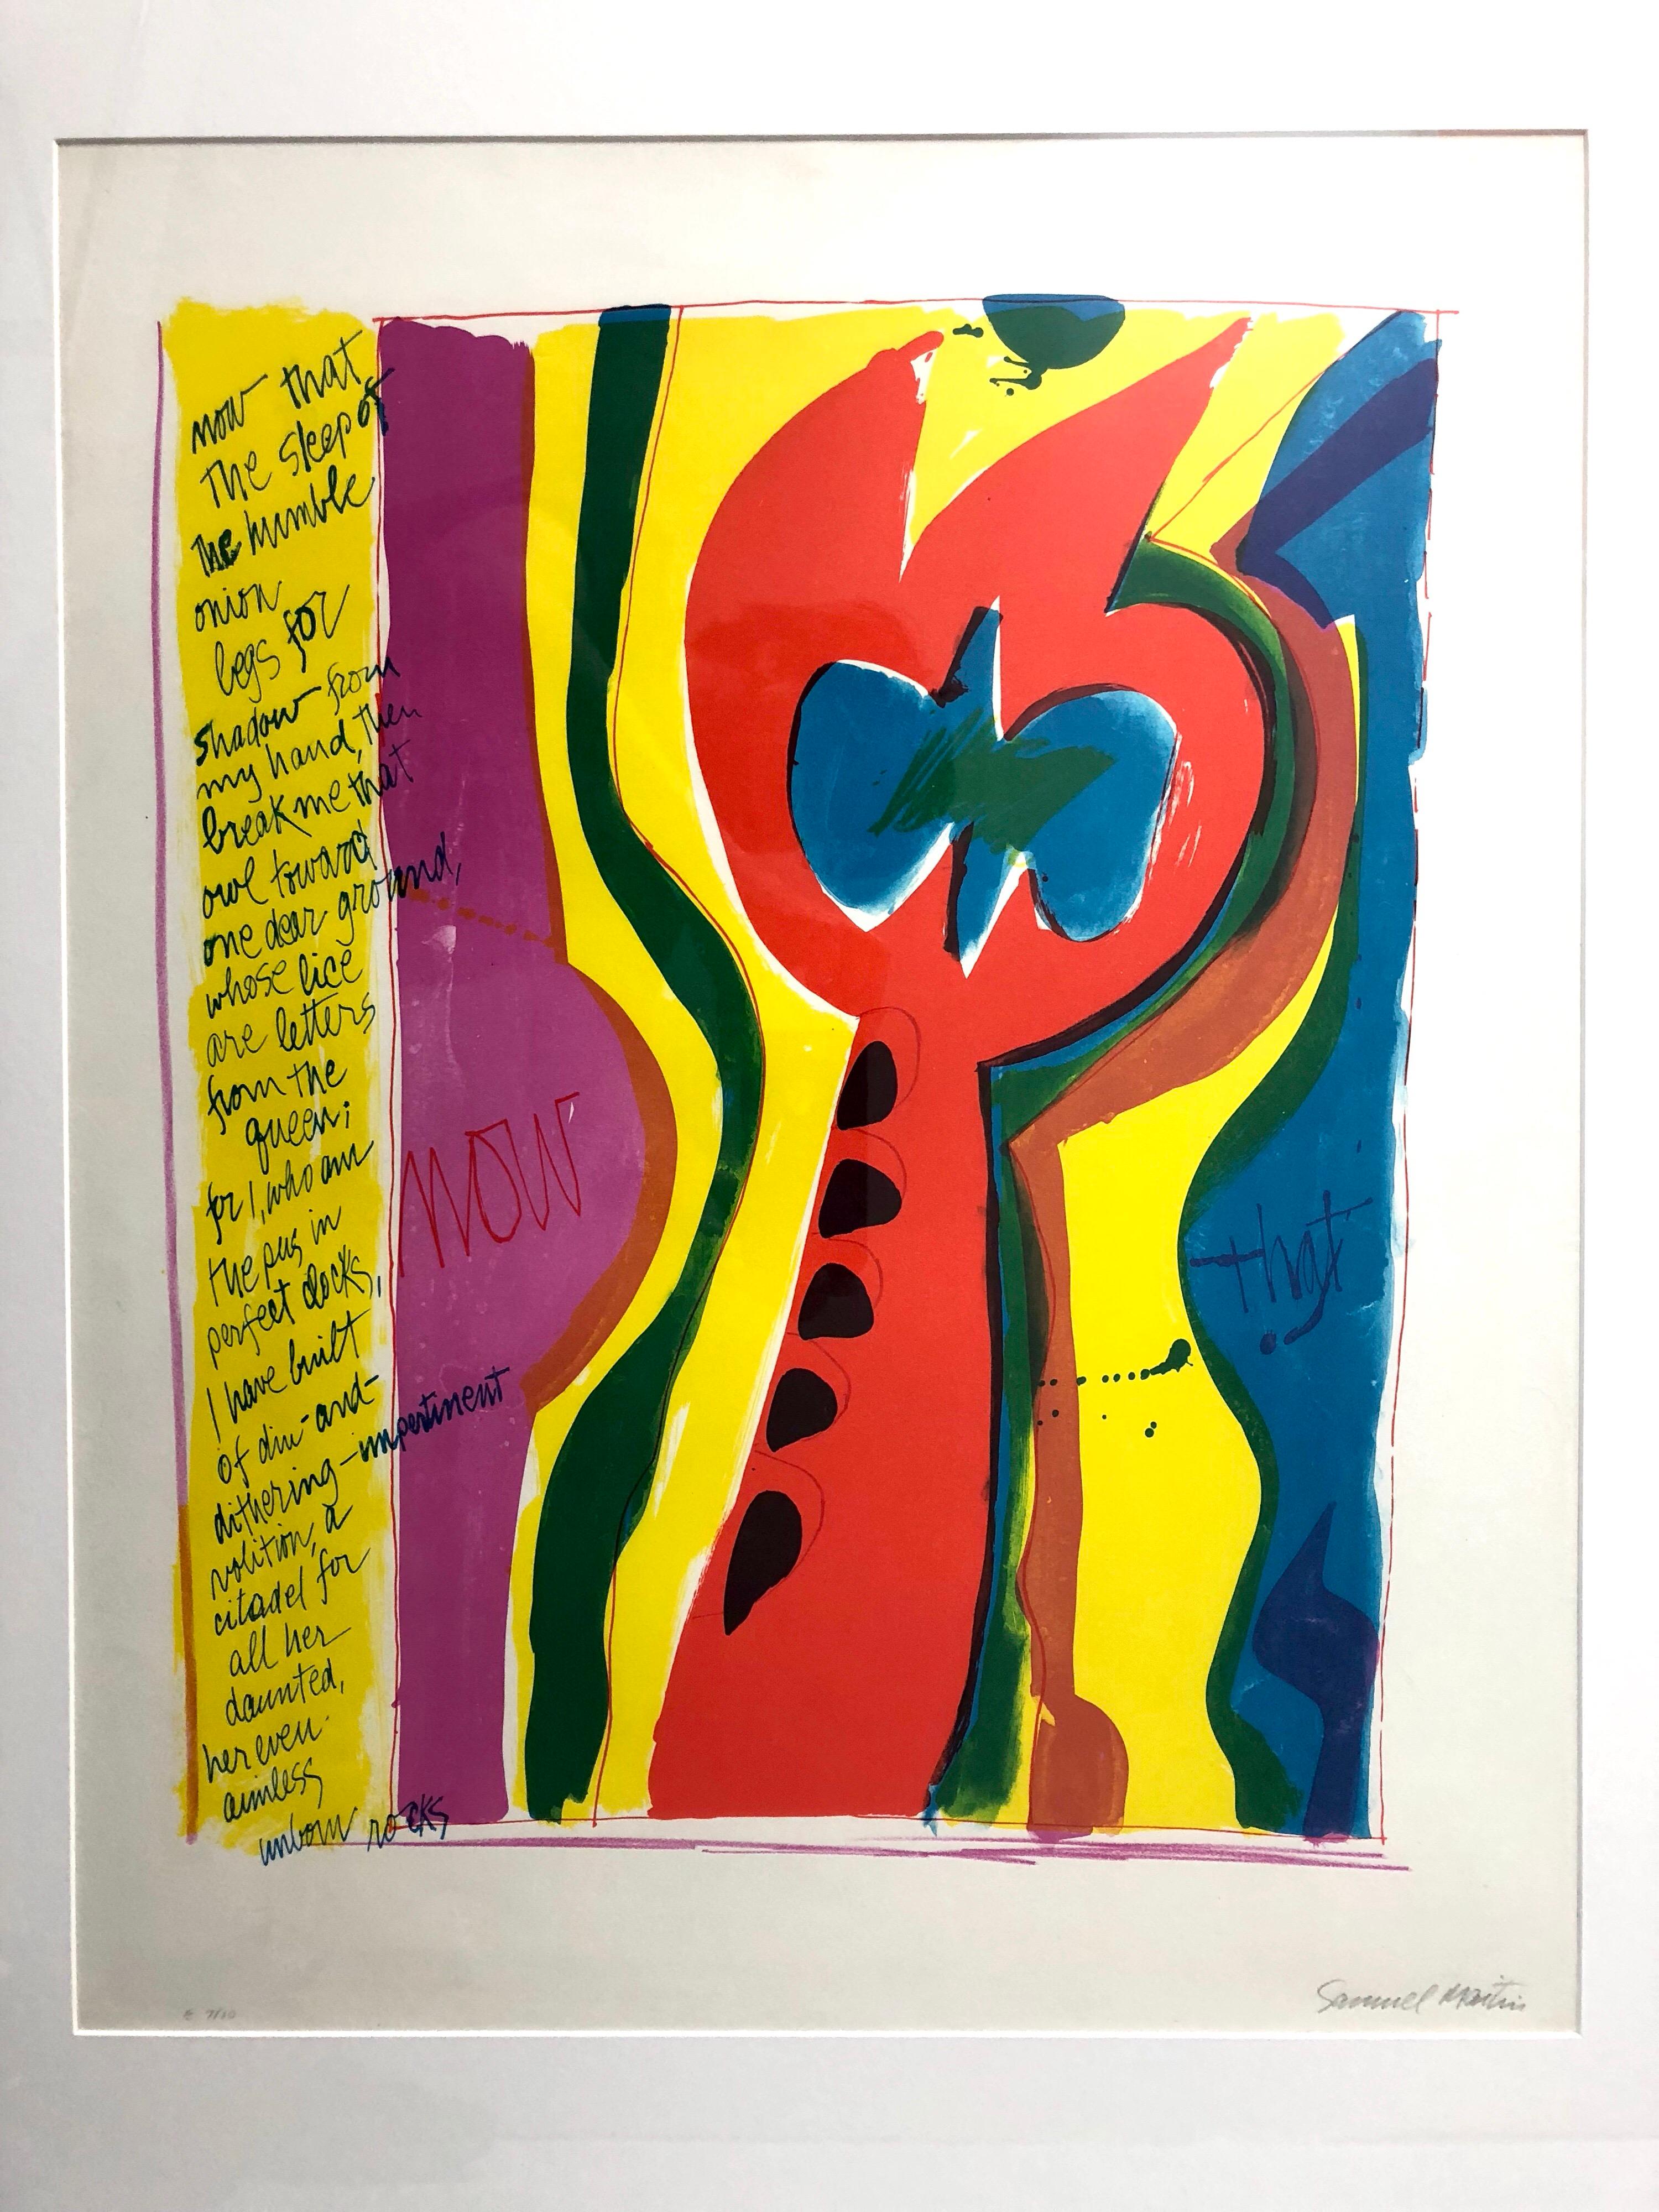 Abstract lithographs in colors from the Curwen series from 1968. Professionally framed. Number 7 of an edition of 10. Size includes frame.

A Penn alumnus, Maitin also taught for a time at the Annenberg School for Communication there.
His work